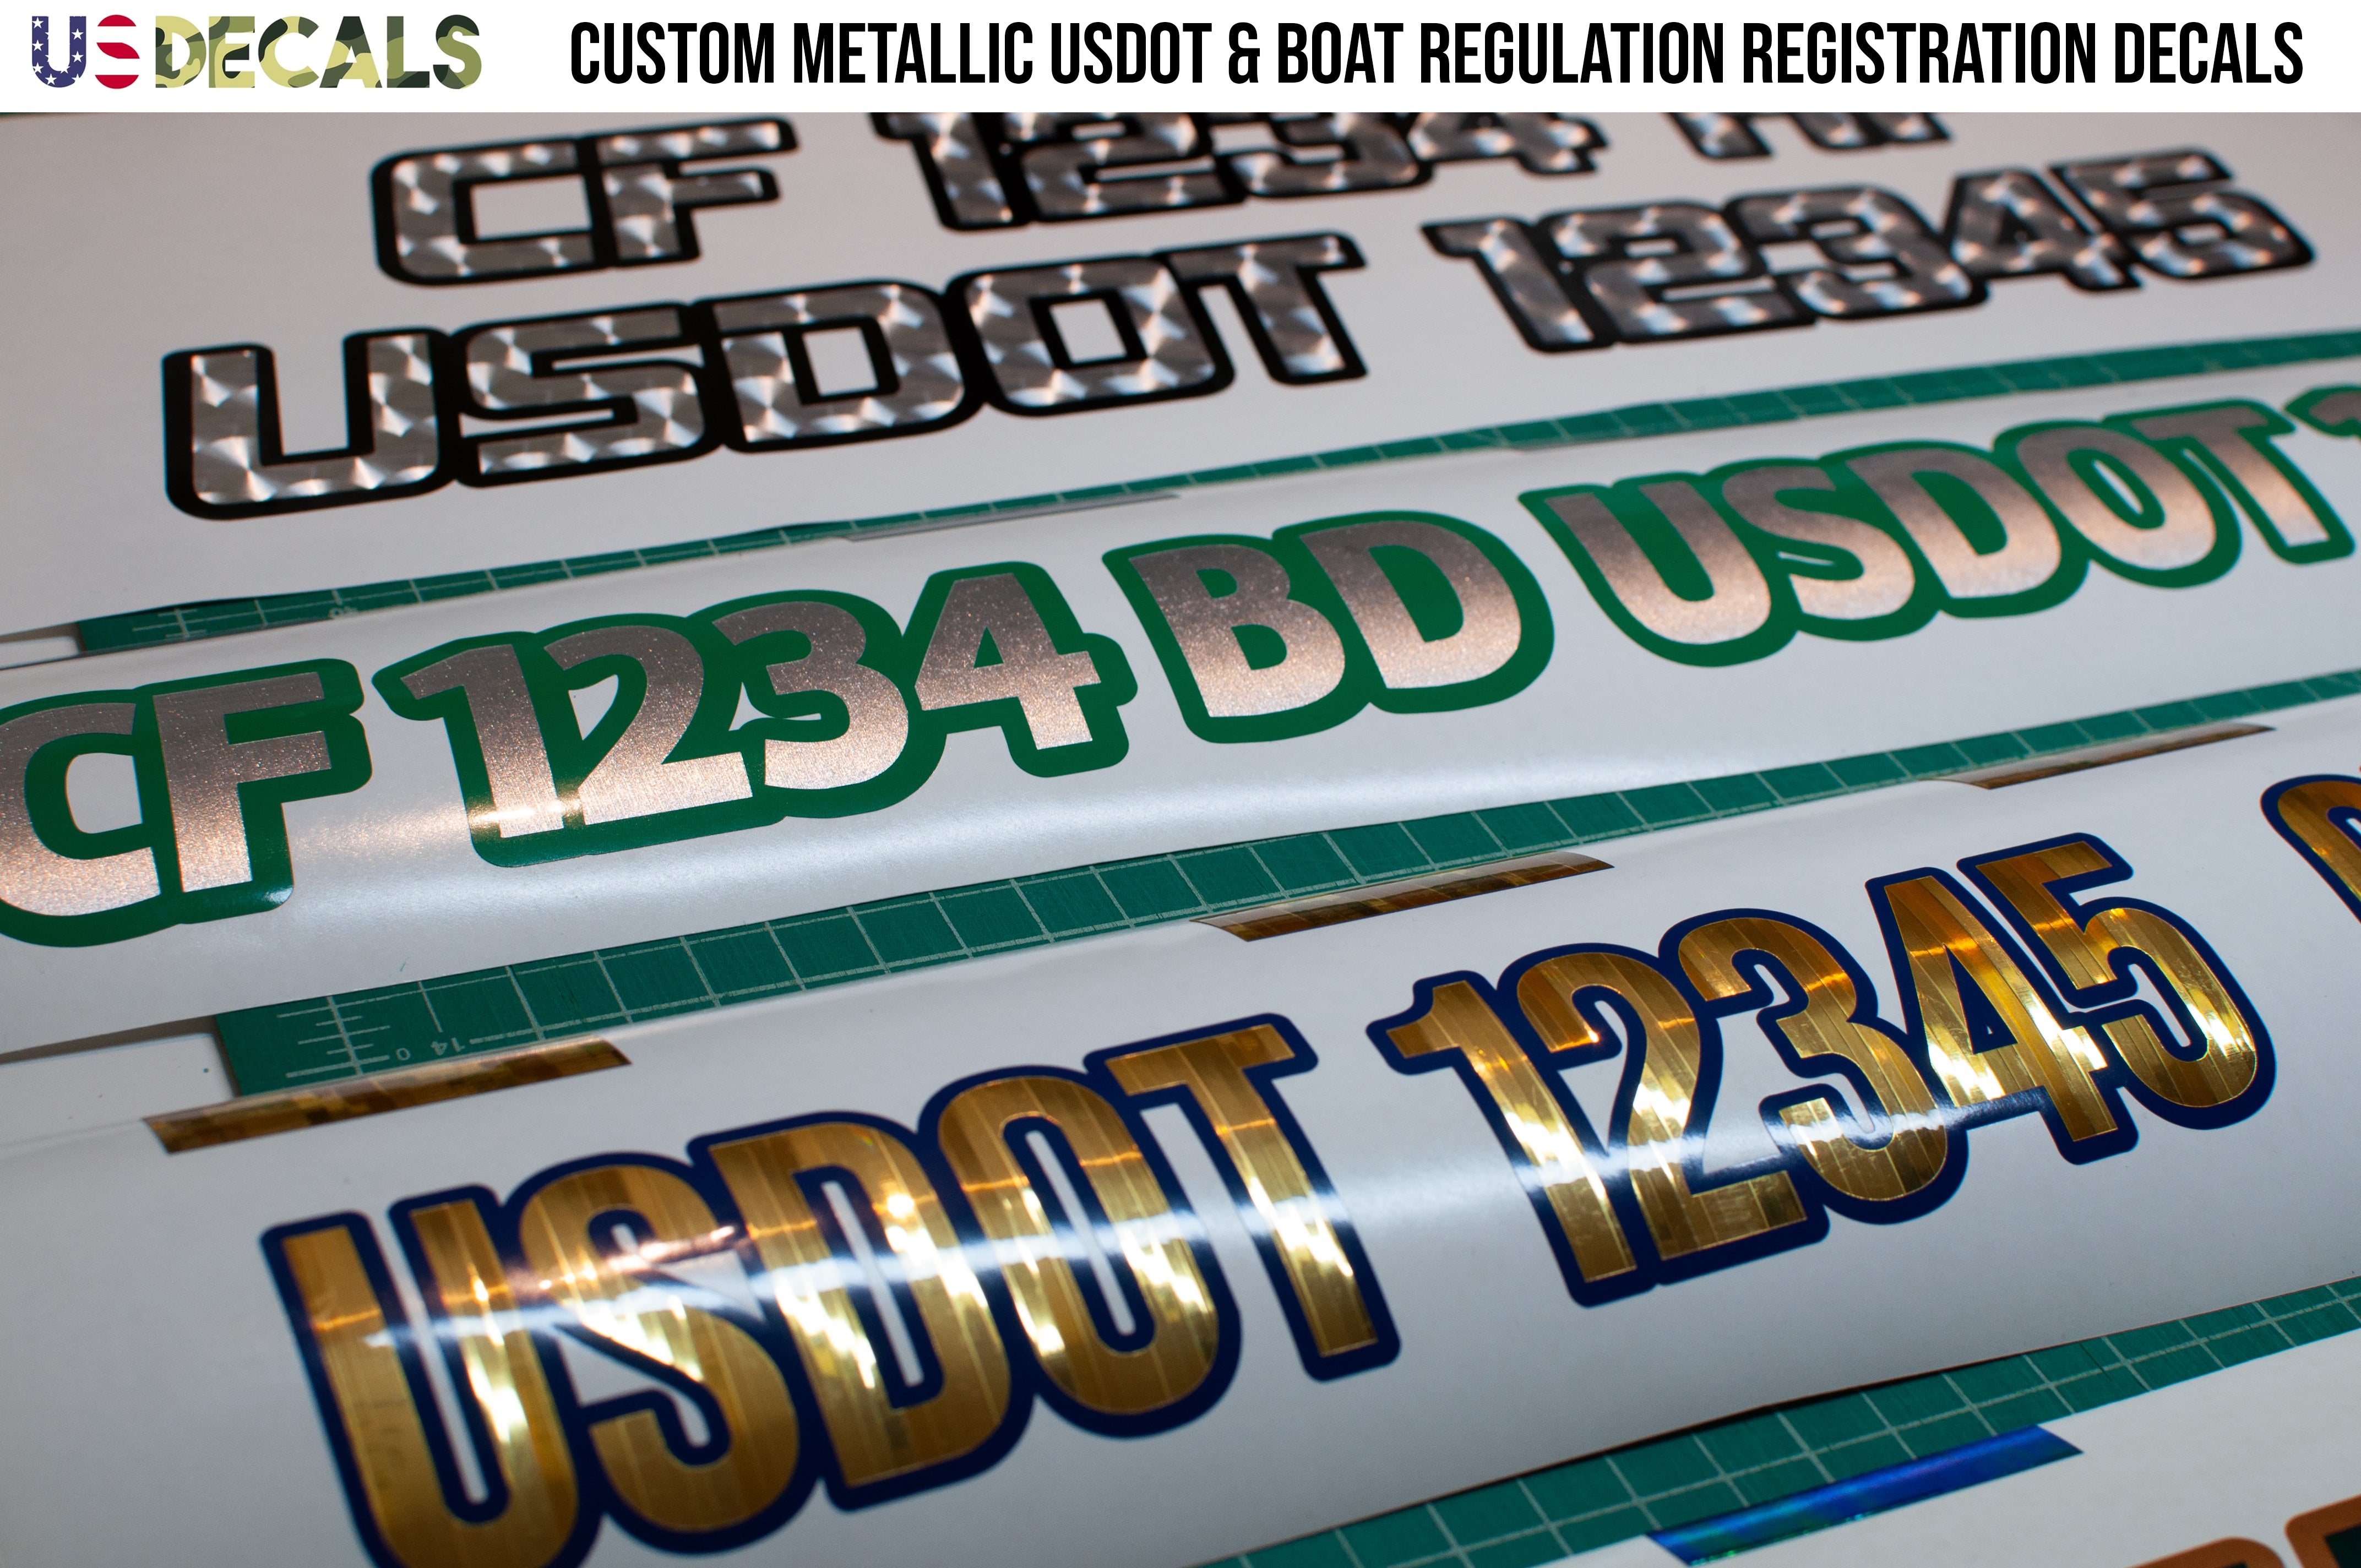 usdot and boat registration numbers